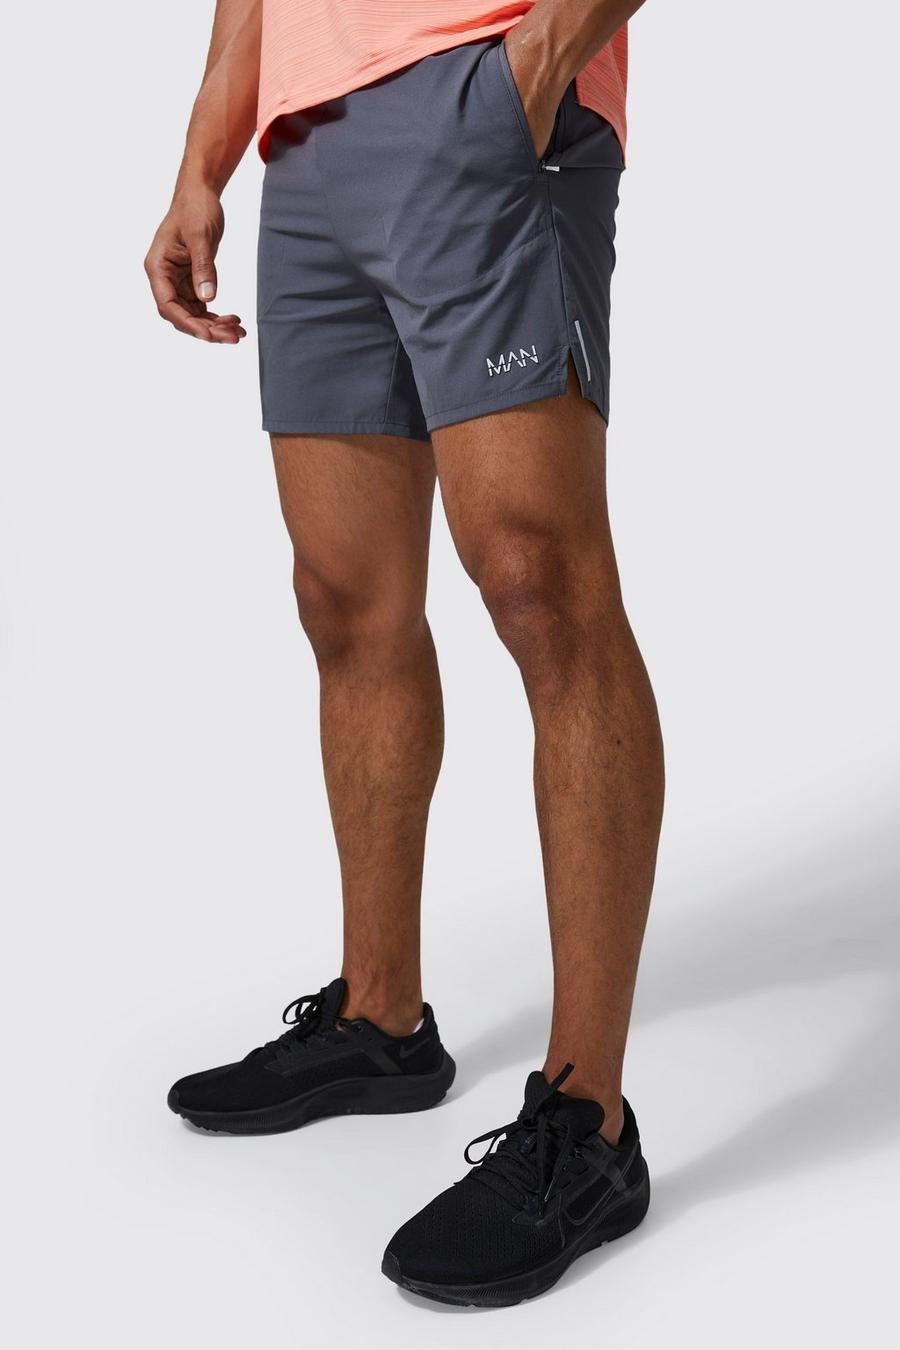 Man Active Lightweight Performance Shorts, Charcoal